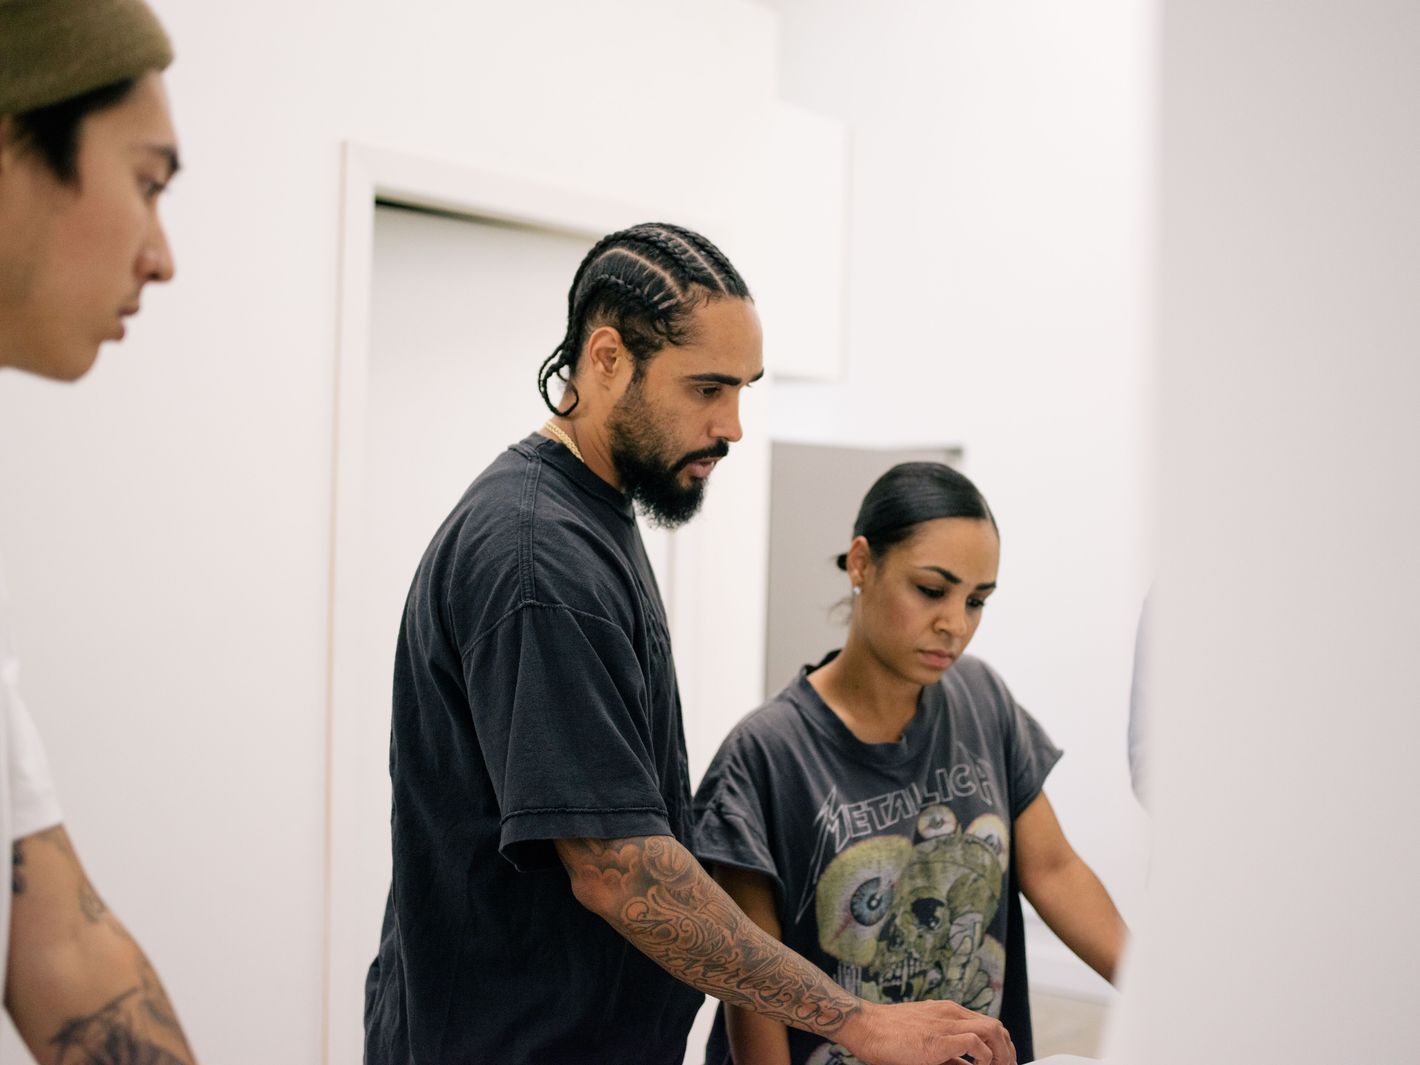 Will Jerry Lorenzo and Fear of God be able to bring a bigger